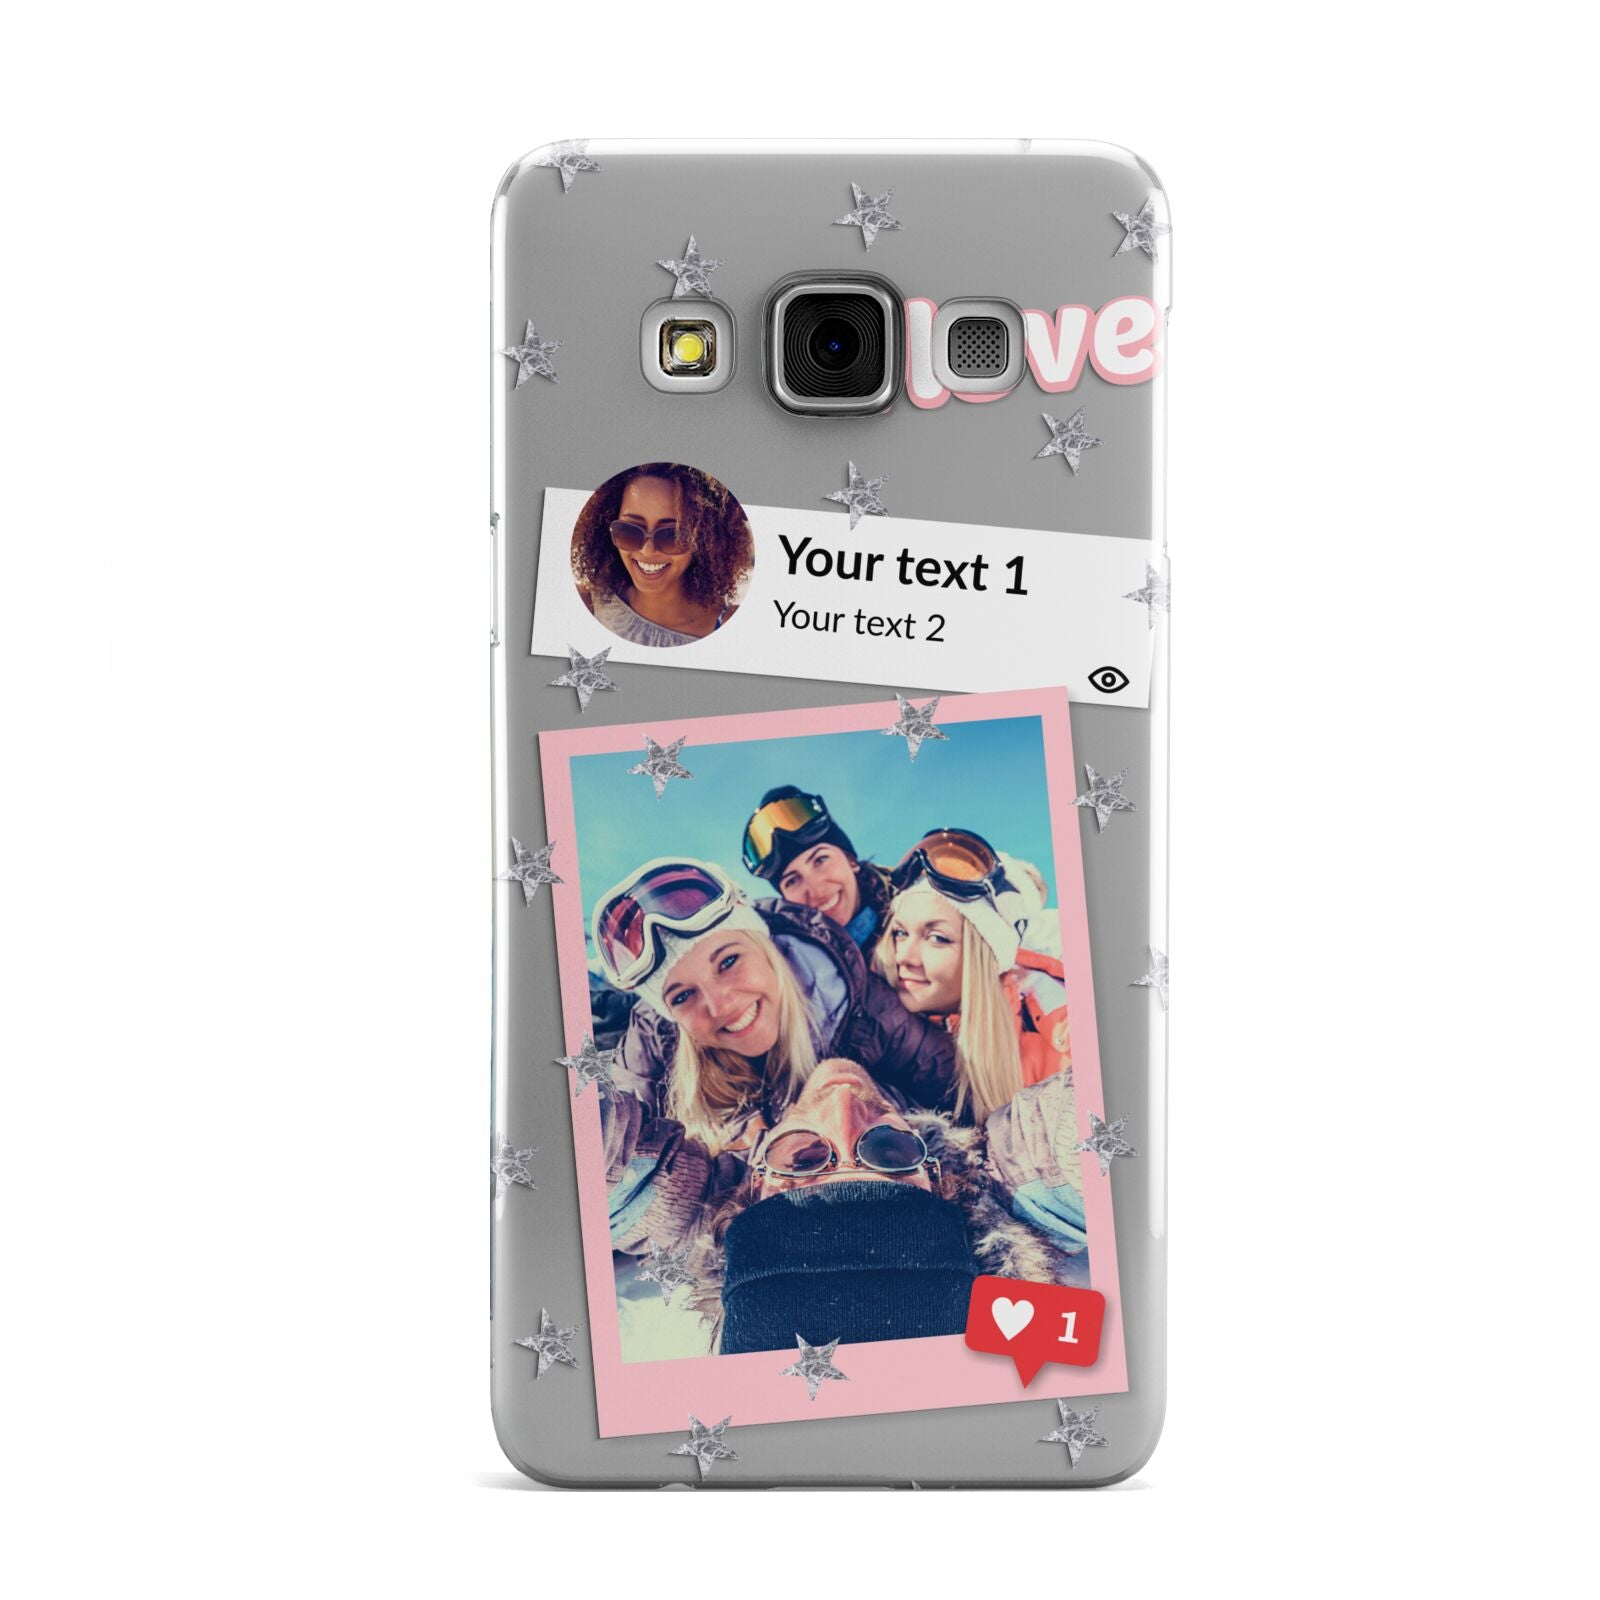 Starry Social Media Photo Montage Upload with Text Samsung Galaxy A3 Case